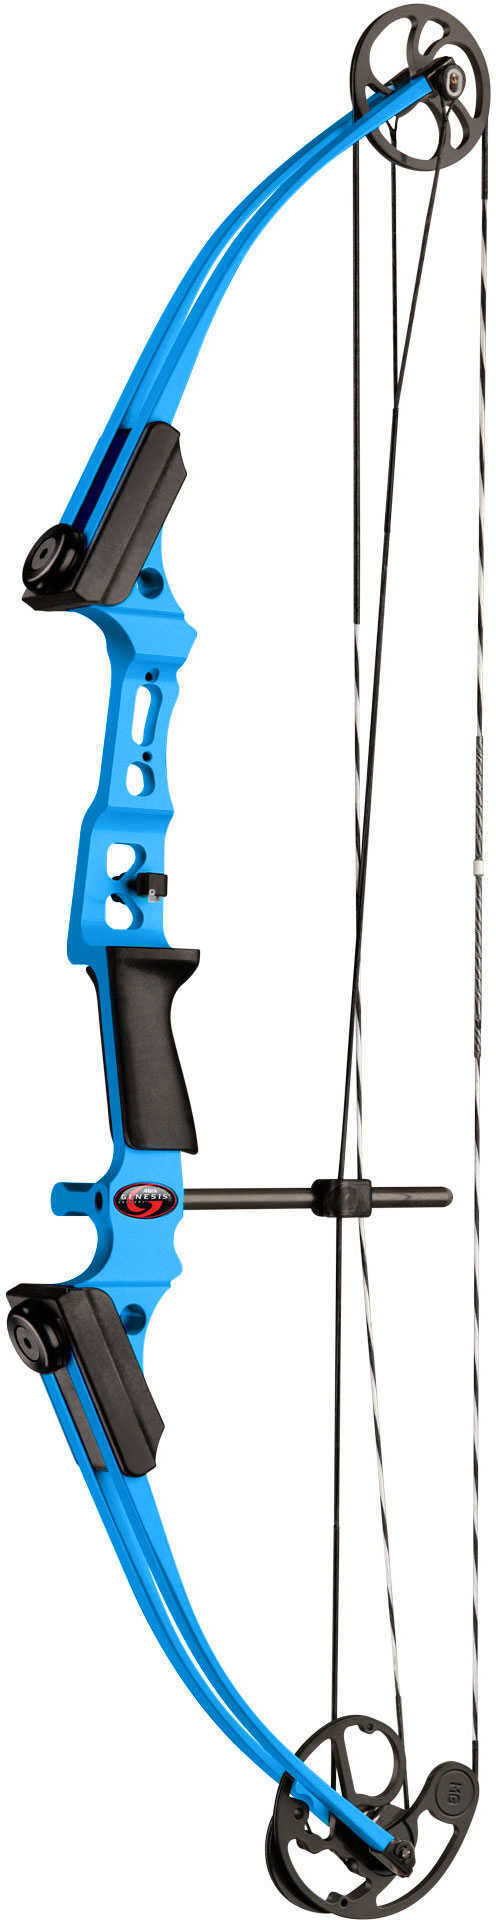 Genesis Mini Bow Right Handed Blue Only 11415